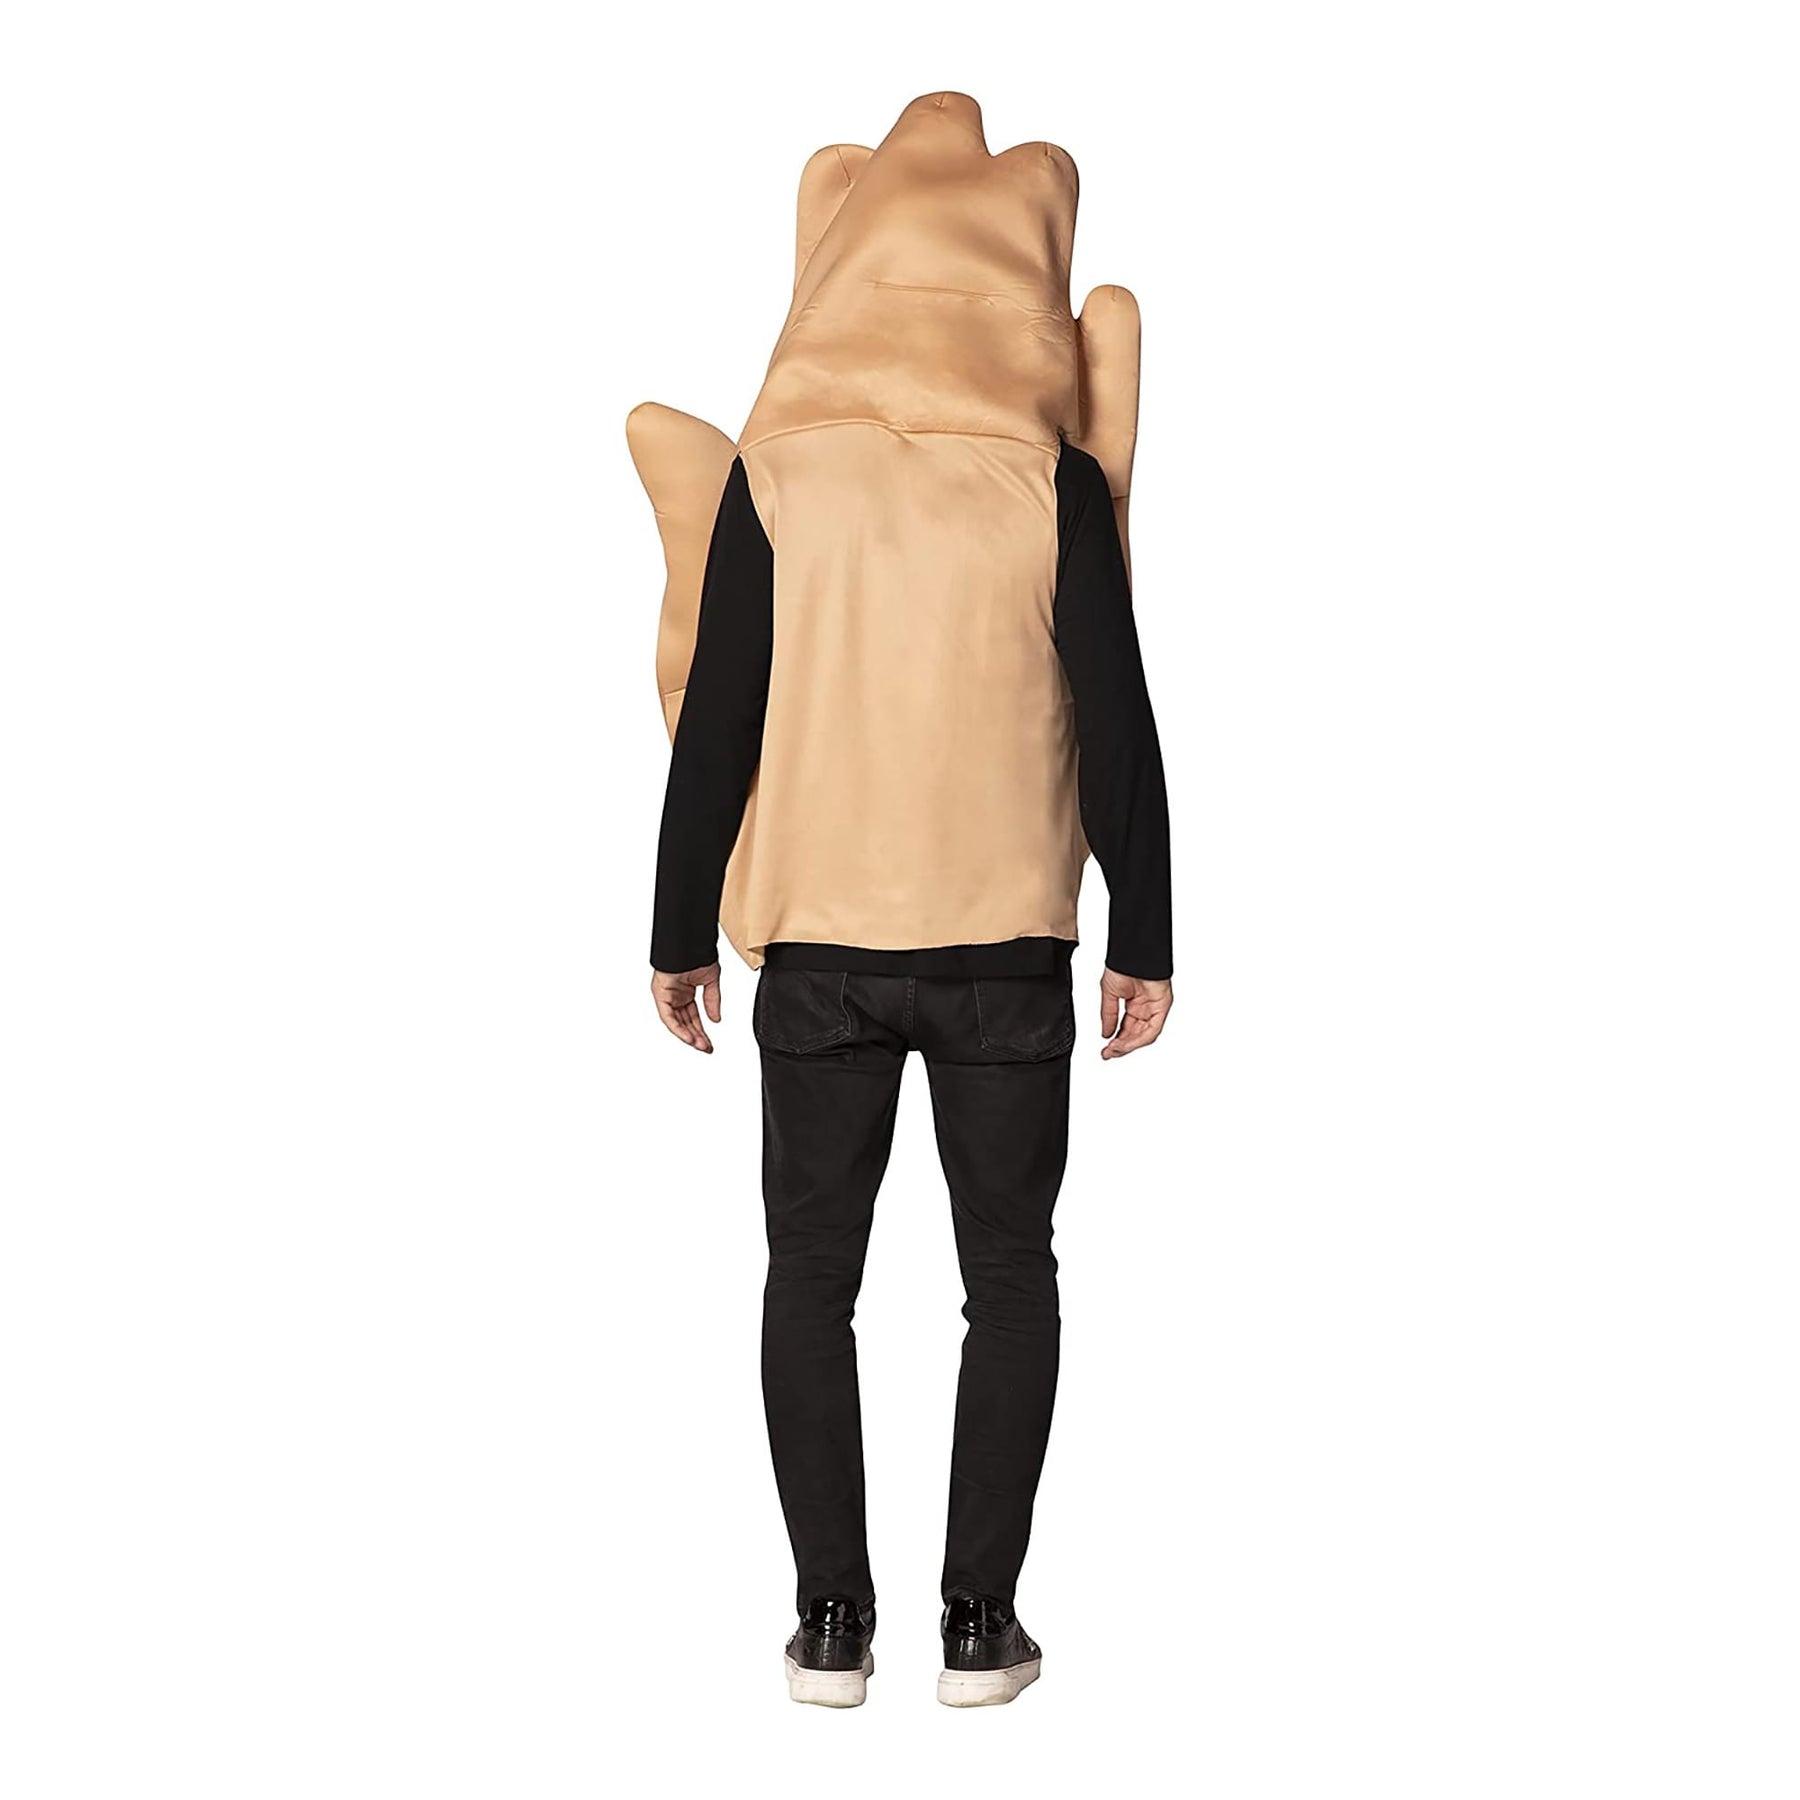 Human Hand Adult Costume | One Size